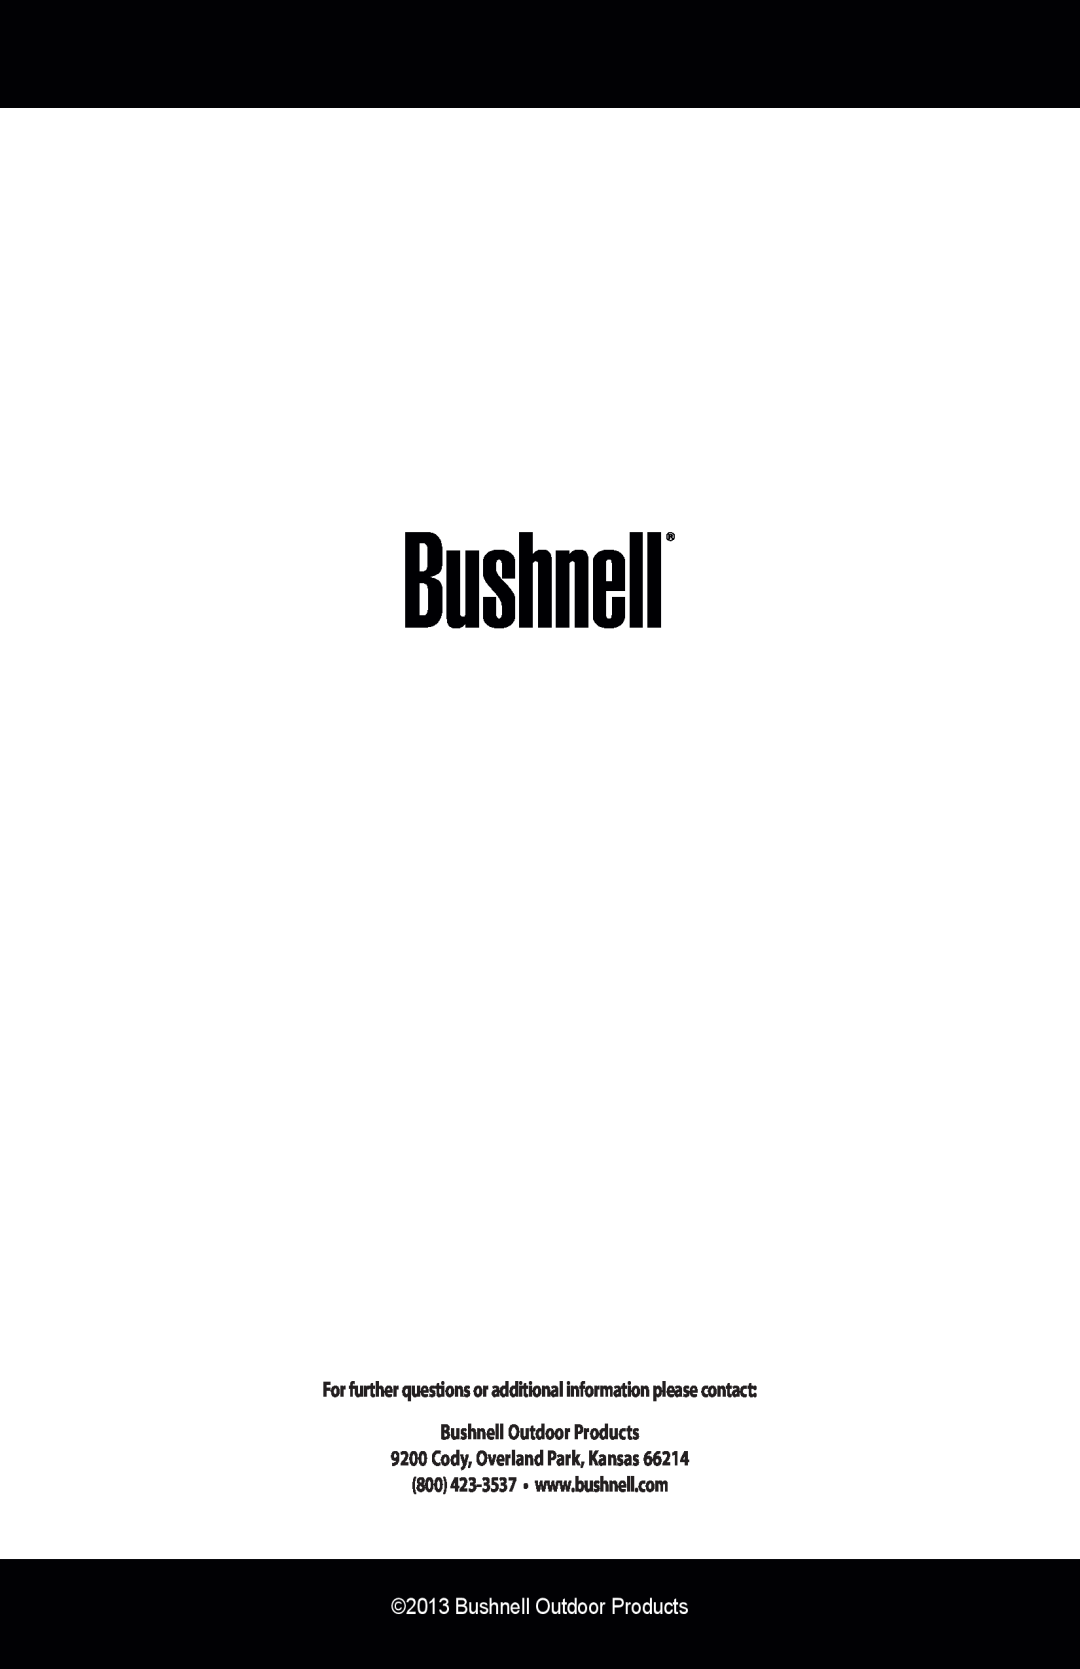 Bushnell 181561 instruction manual Cody, Overland Park, Kansas, Bushnell Outdoor Products 